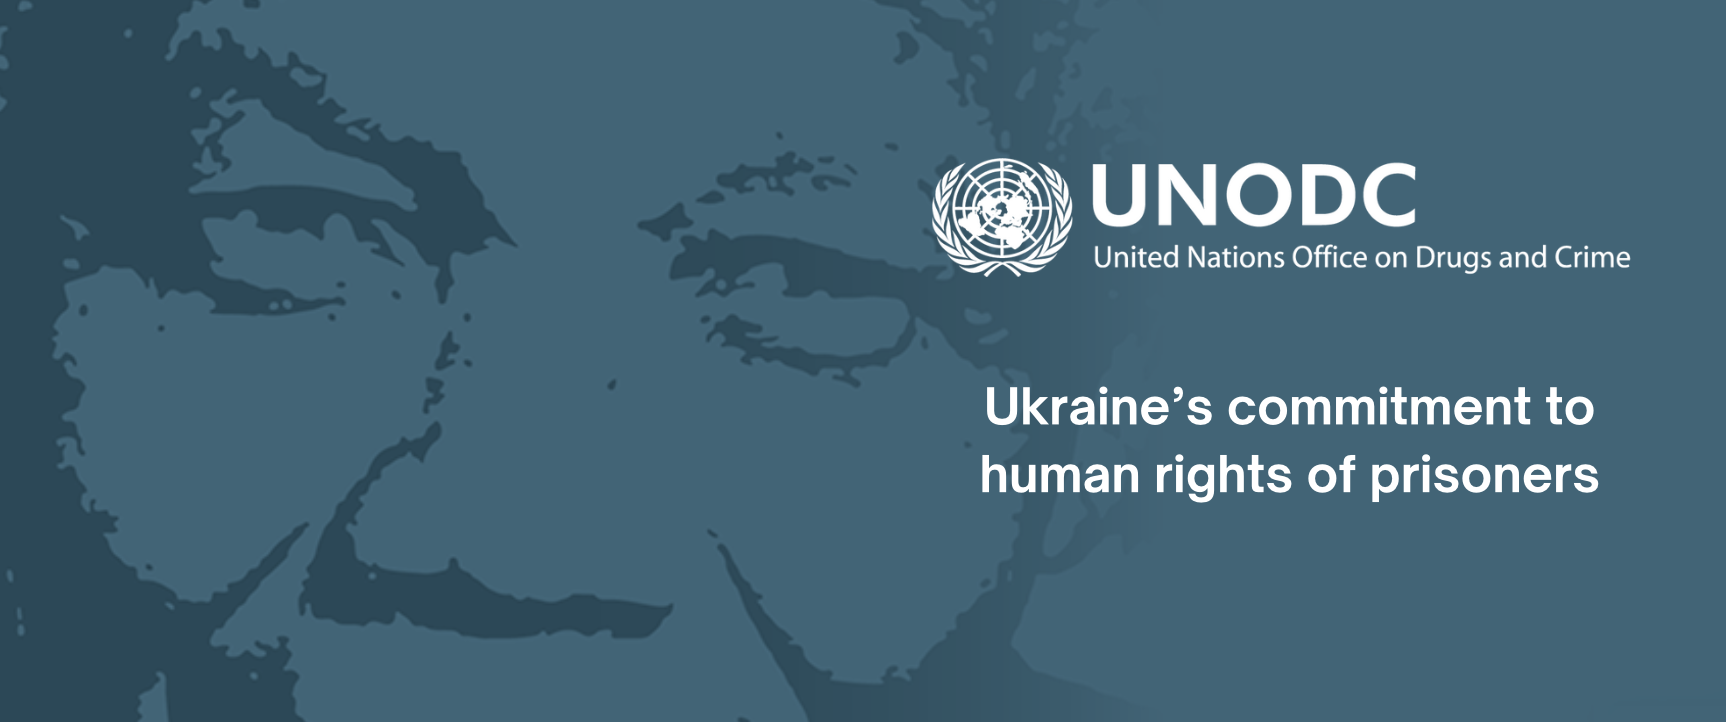 Webstory: Ukraine’s commitment to human rights of prisoners